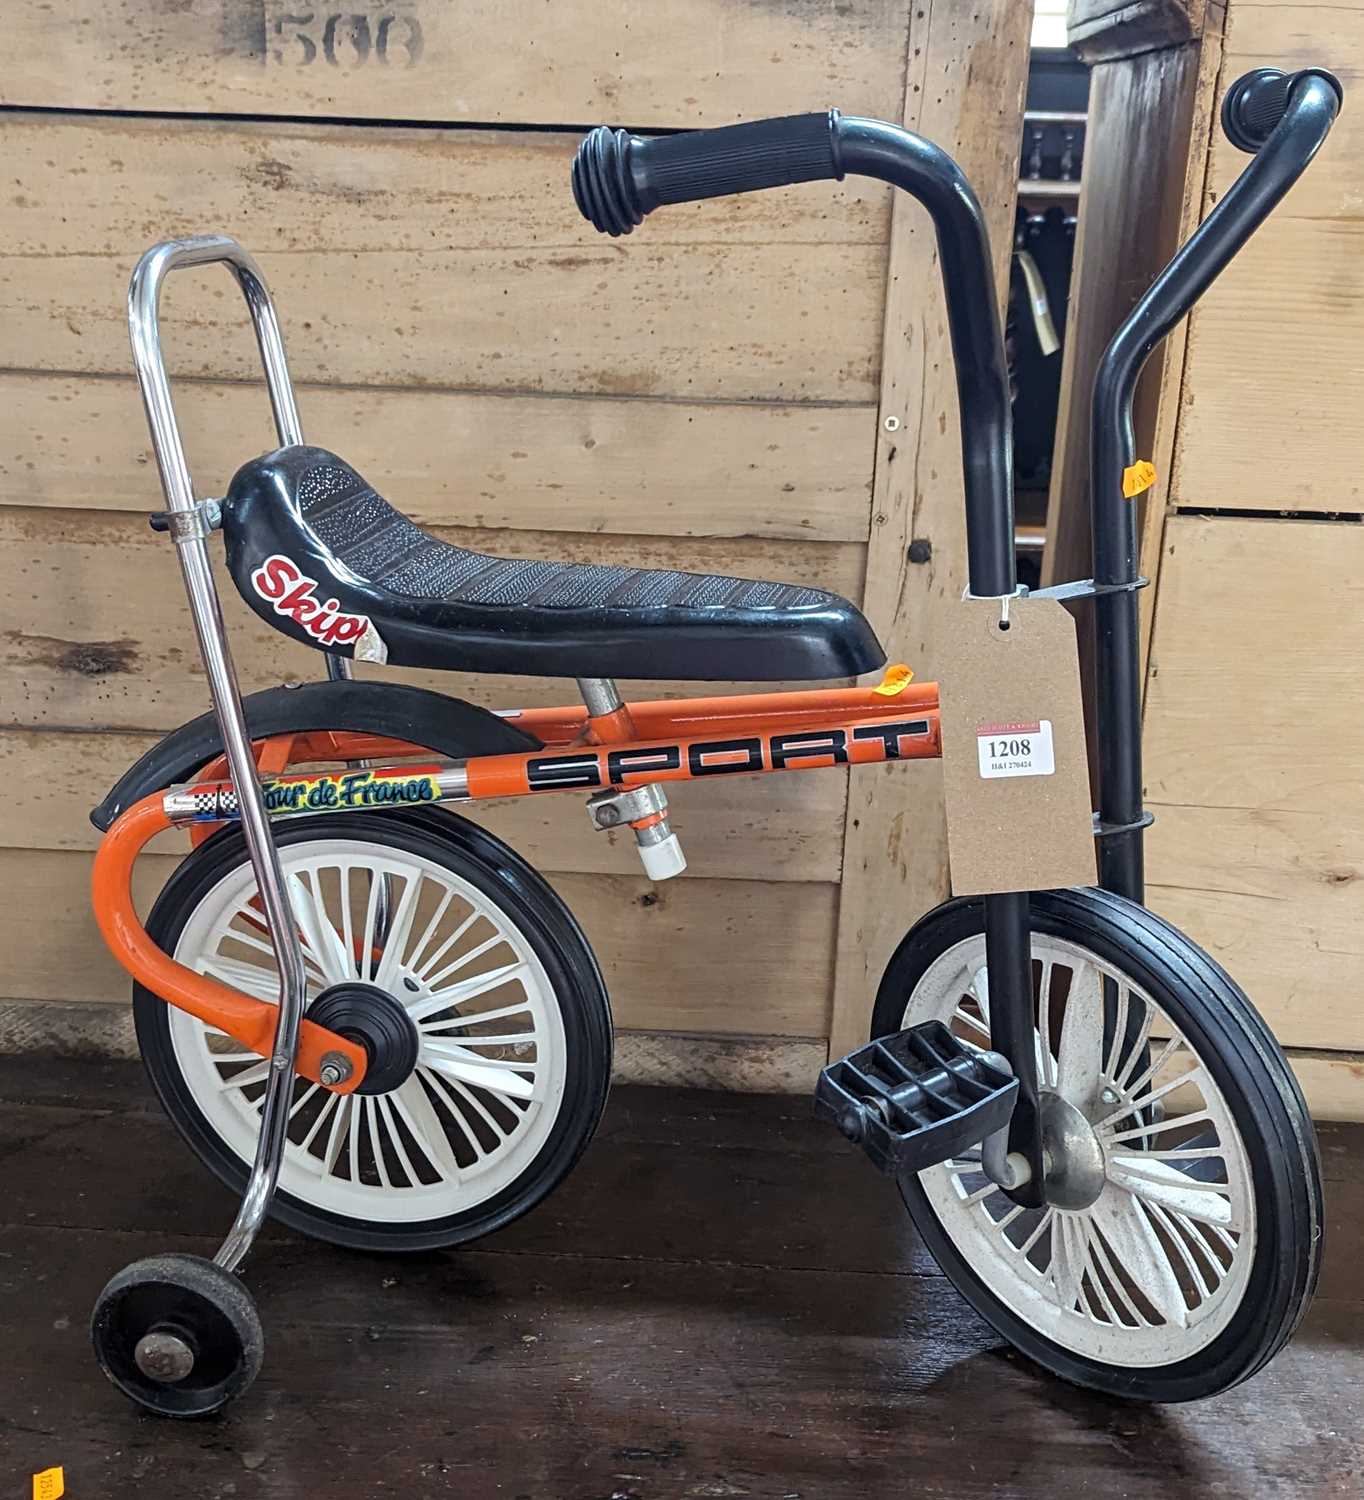 A 1970s children's vintage tricycle, with rear stabliser wheels